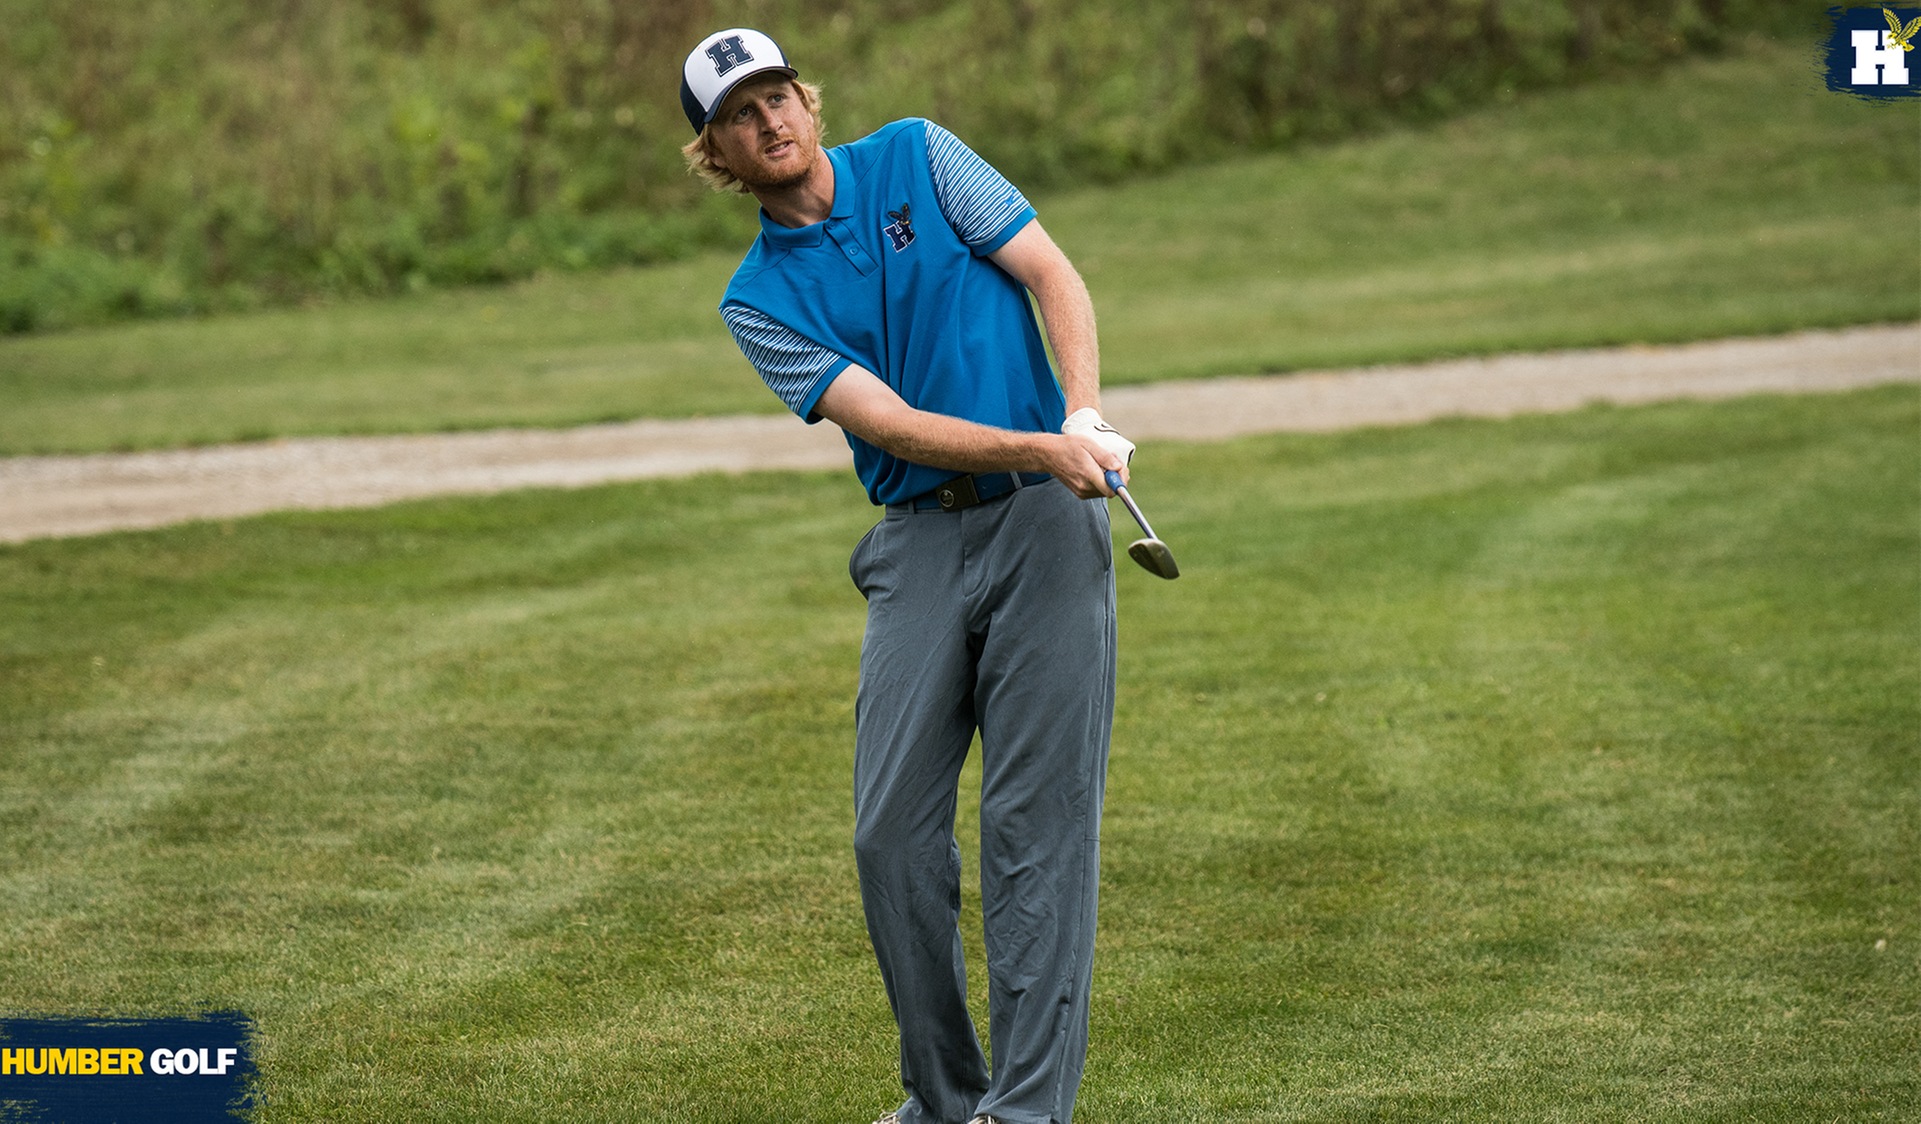 OCAA CHAMPIONSHIP UPDATE: VANCE LEADS No. 3 MEN'S GOLF AFTER FIRST ROUND